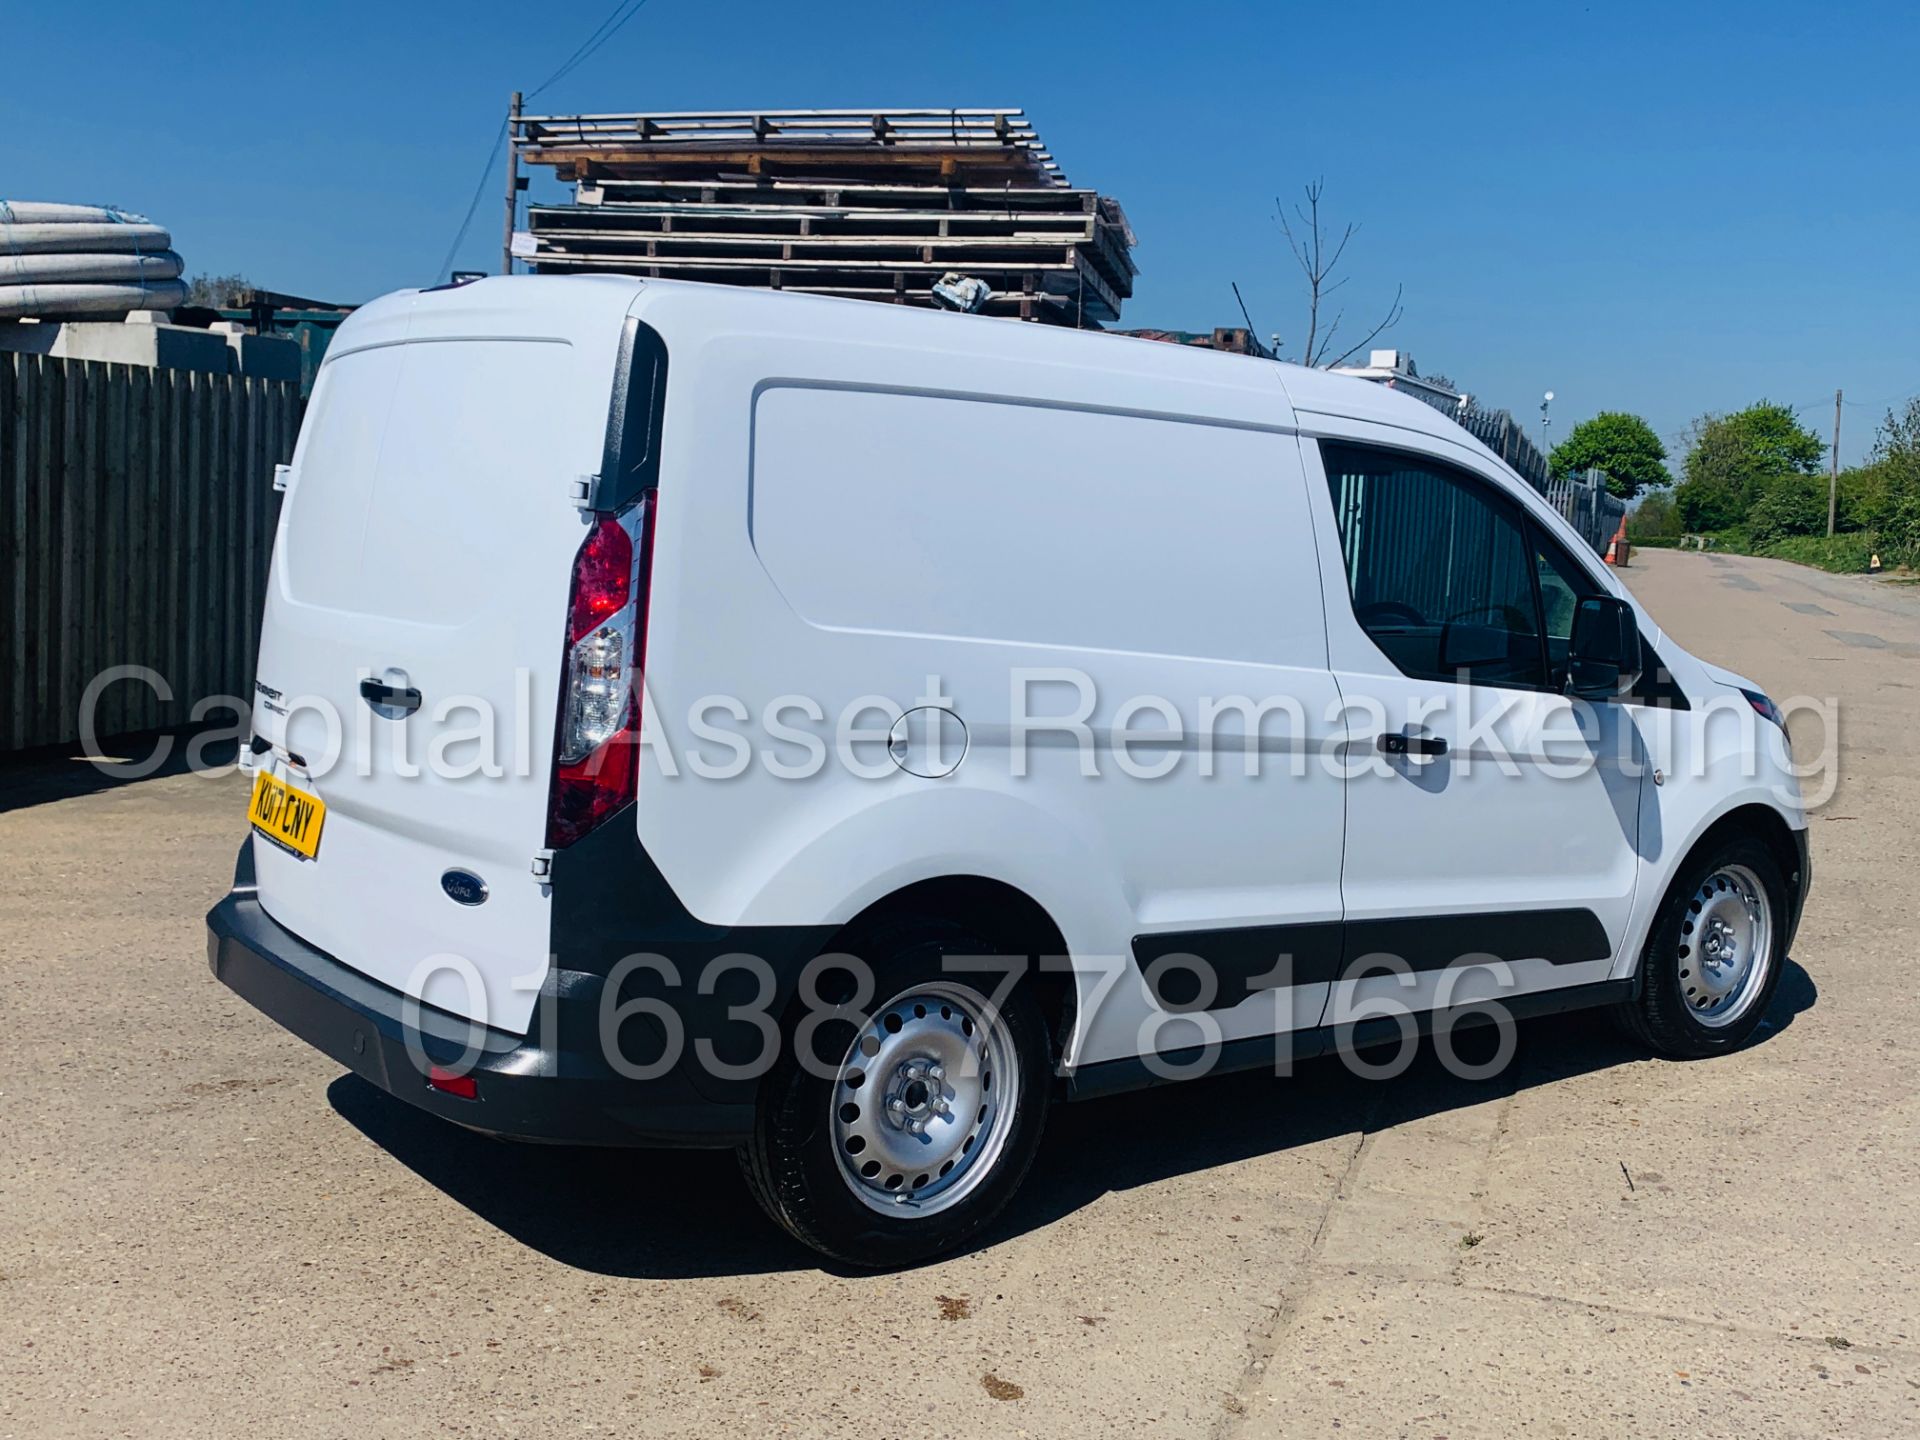 (On Sale) FORD TRANSIT CONNECT *SWB* (2017 - EURO 6) '1.5 TDCI - 6 SPEED' (1 OWNER - FULL HISTORY) - Image 9 of 38